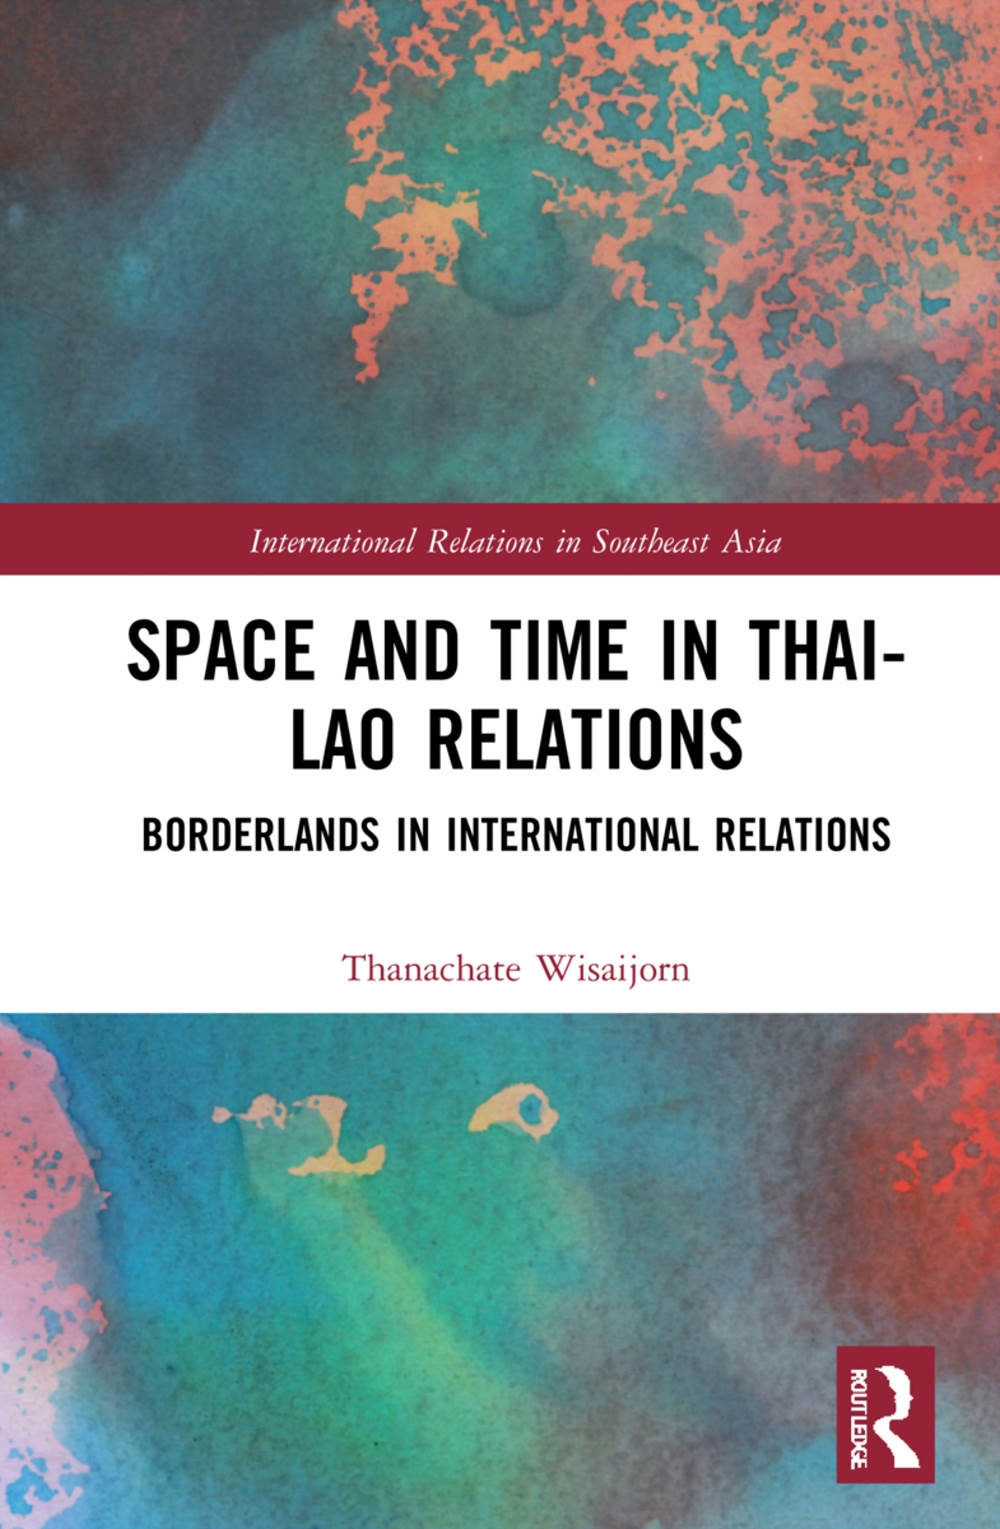 Space and Time in Thai-Lao Relations: Borderlands in International Relations